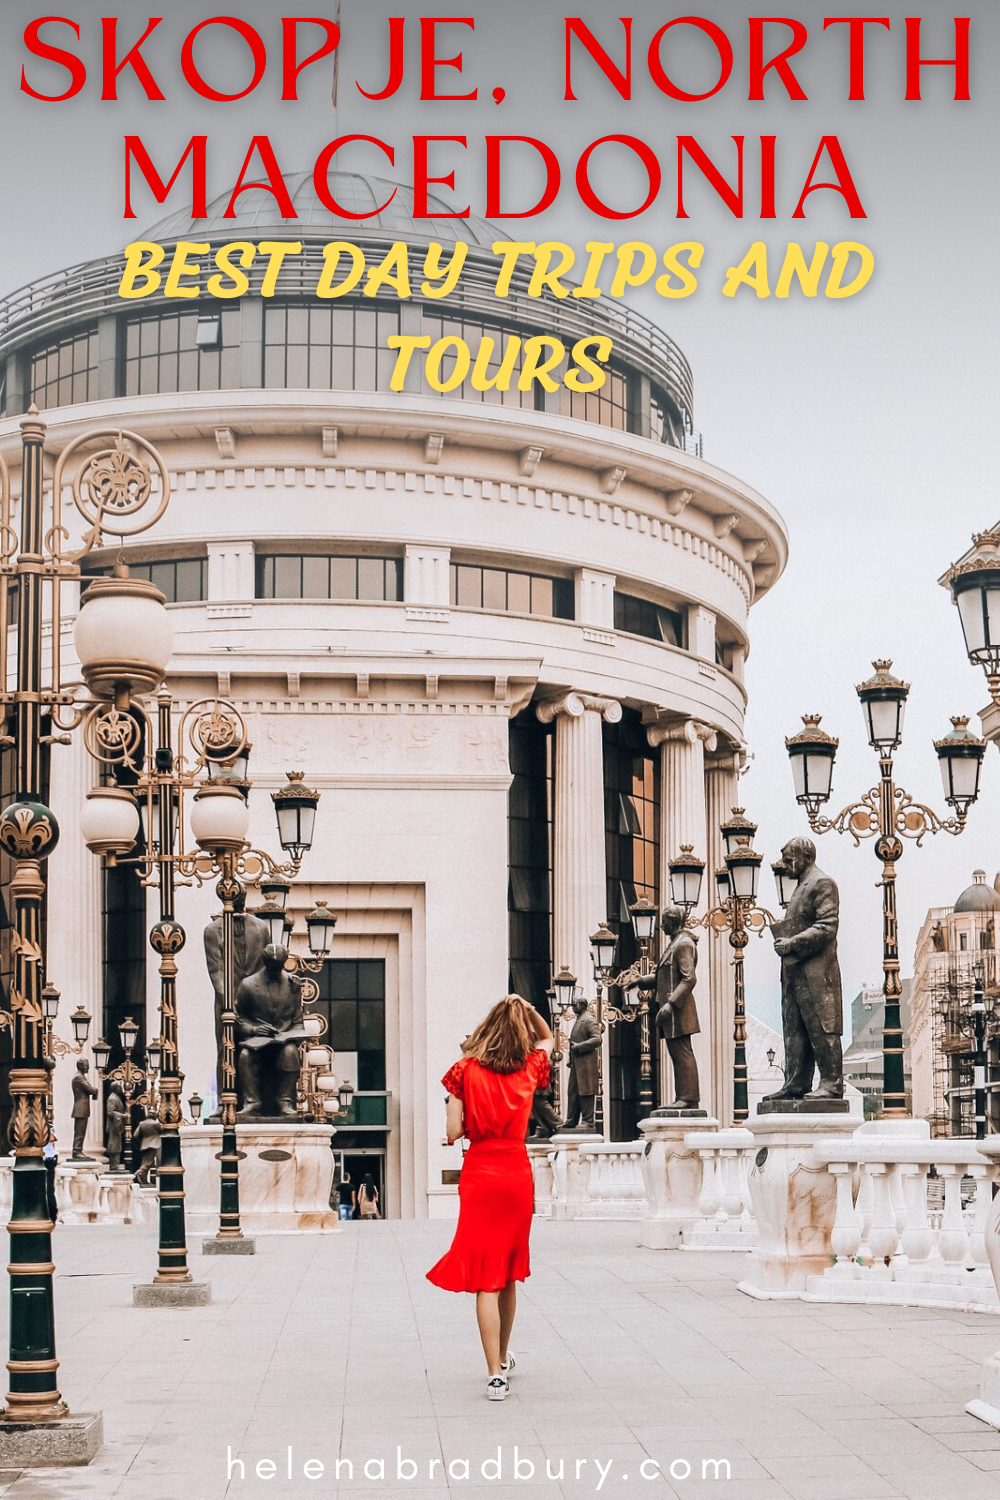 Maximise your time in North Macedonia with these day tours from Skopje and Skopje day trips to some of the highlights in and around the country. From a Skopje to Kosovo day trip, to the best options for visiting Matka Canyon from Skopje, here are my